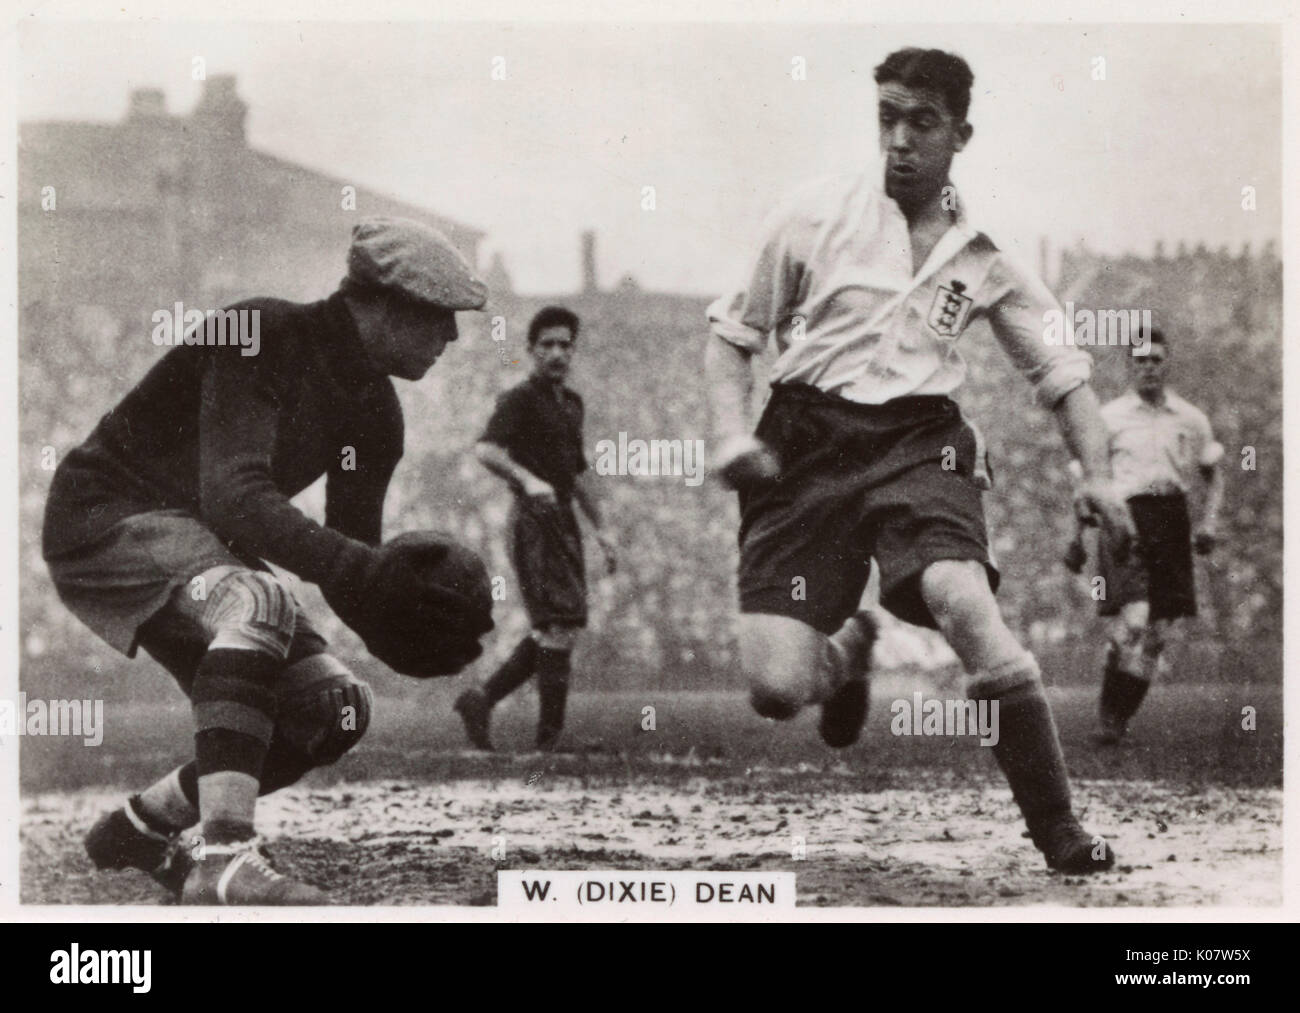 W R (Dixie) Dean (1907-1980), English footballer, Captain of Everton FC football team, seen here (right) in action during a match.      Date: 1930s Stock Photo